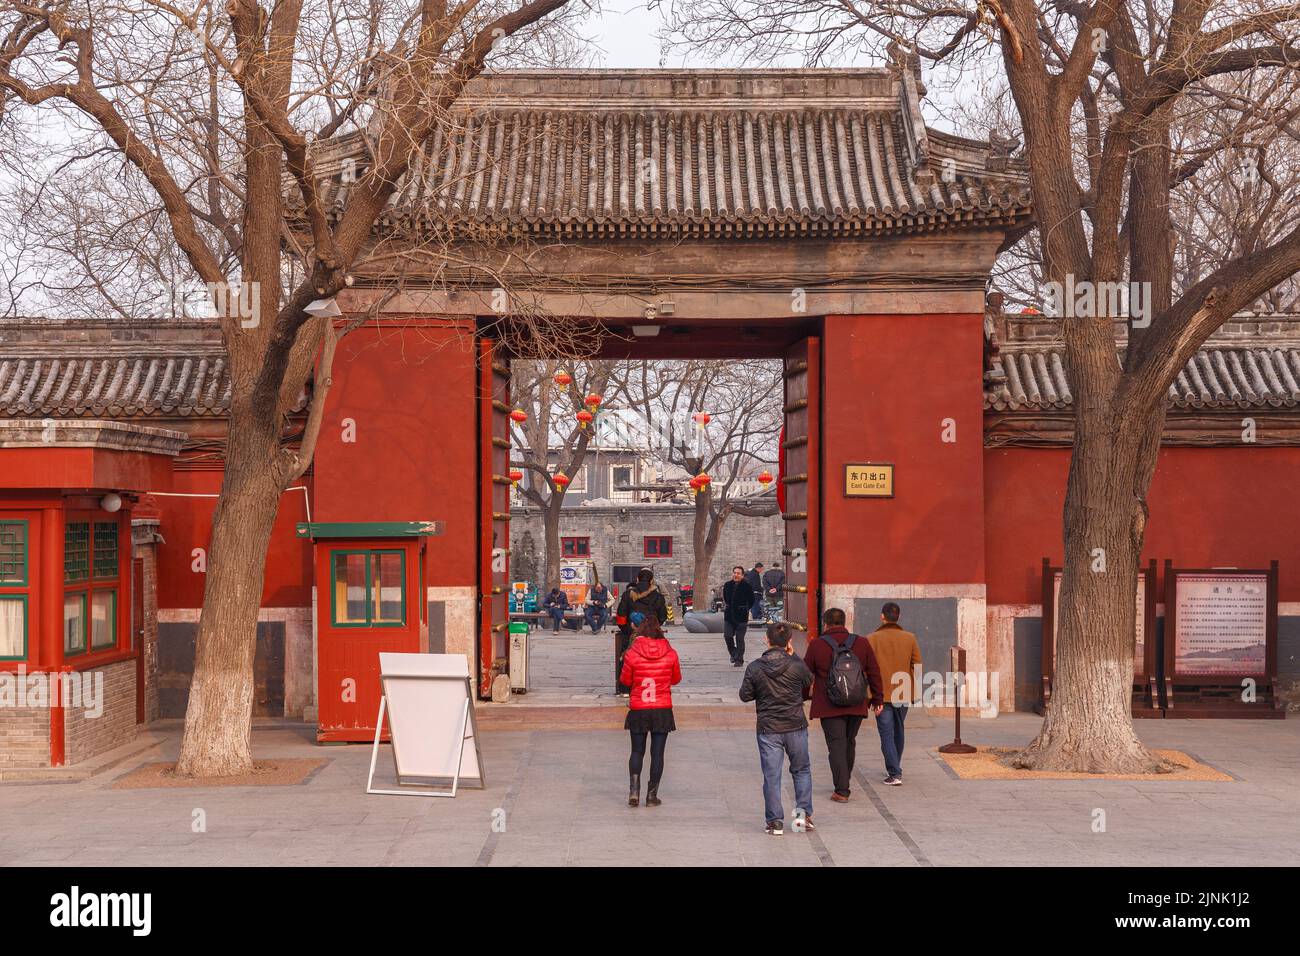 BEIJING, CHINA - MARCH 12, 2018: East Gate Exit at Behai Park on a cold day in Beijing, China on March 12, 2018. Stock Photo